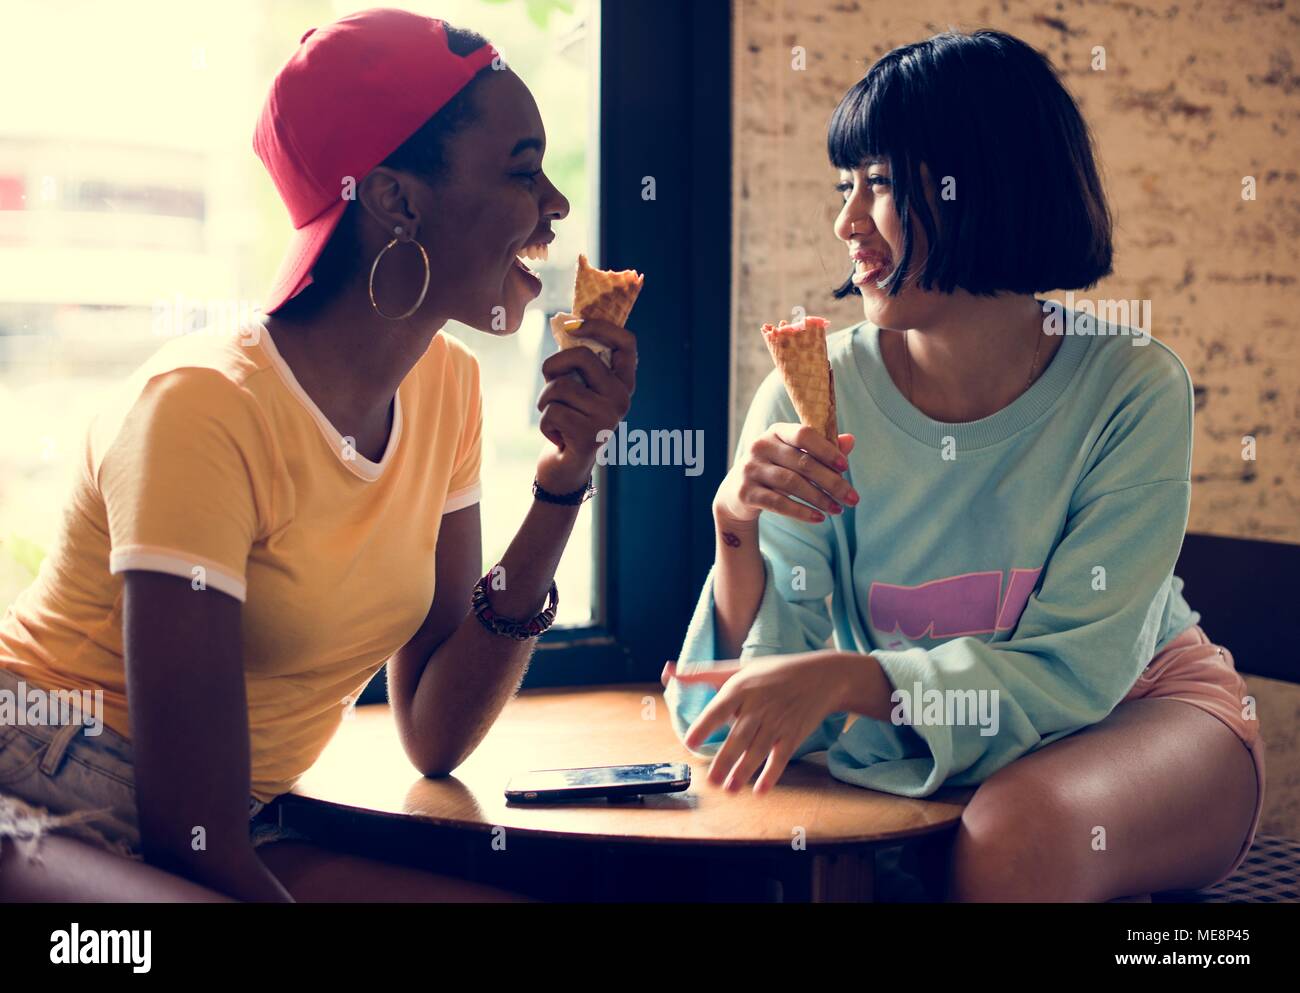 Women eating ice cream together Stock Photo